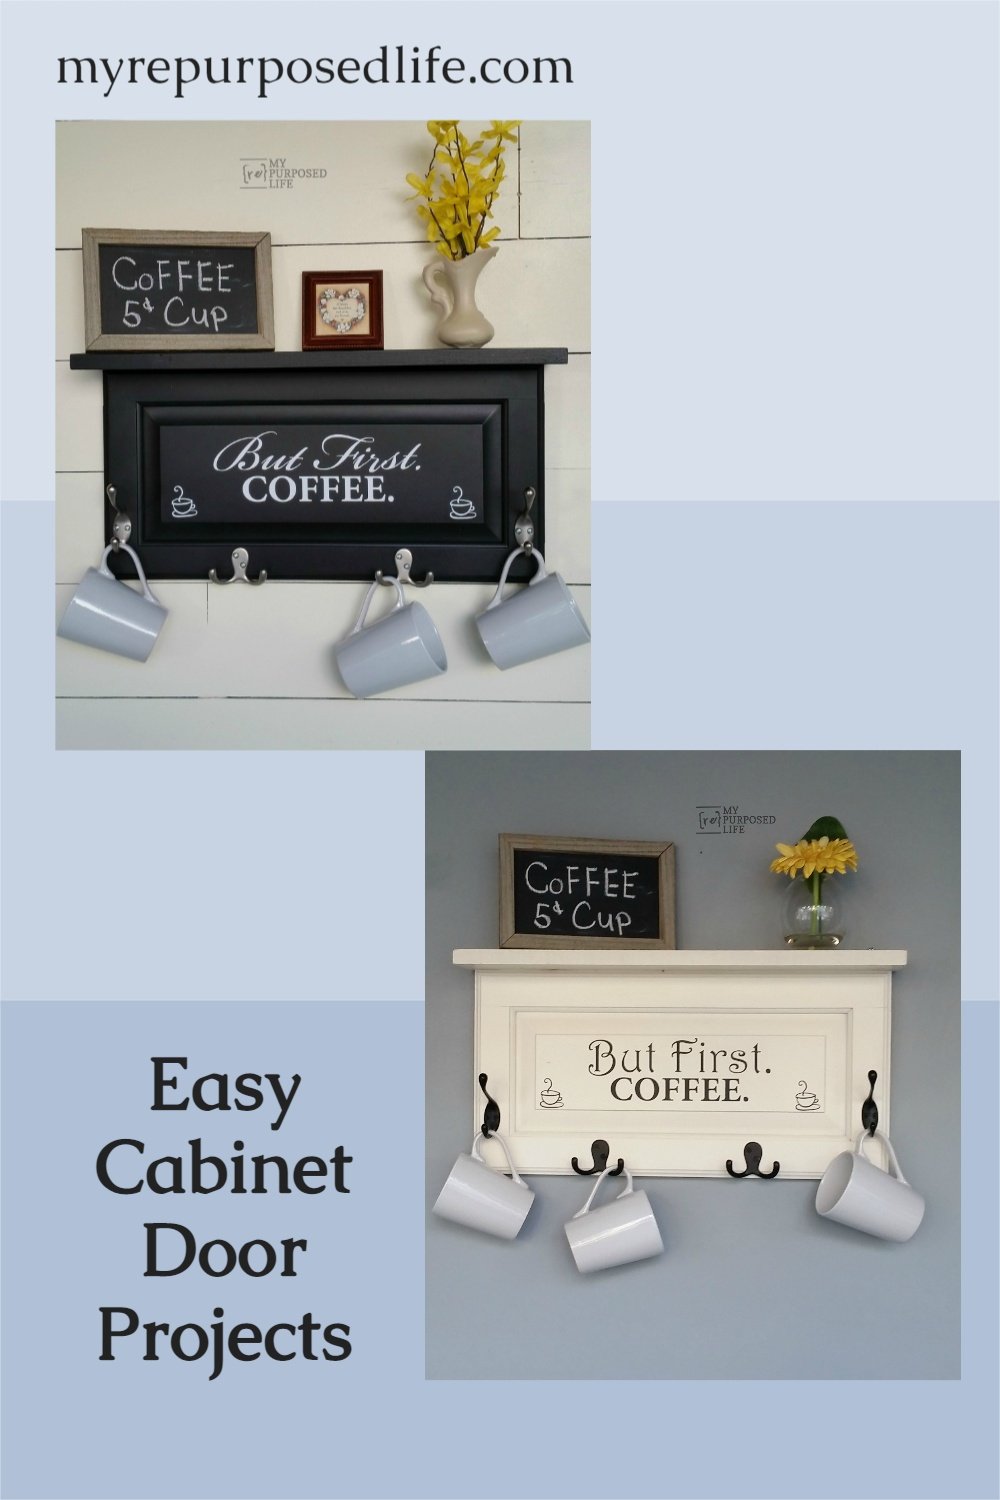 easy cabinet door projects   My Repurposed Life® Rescue Re imagine ...